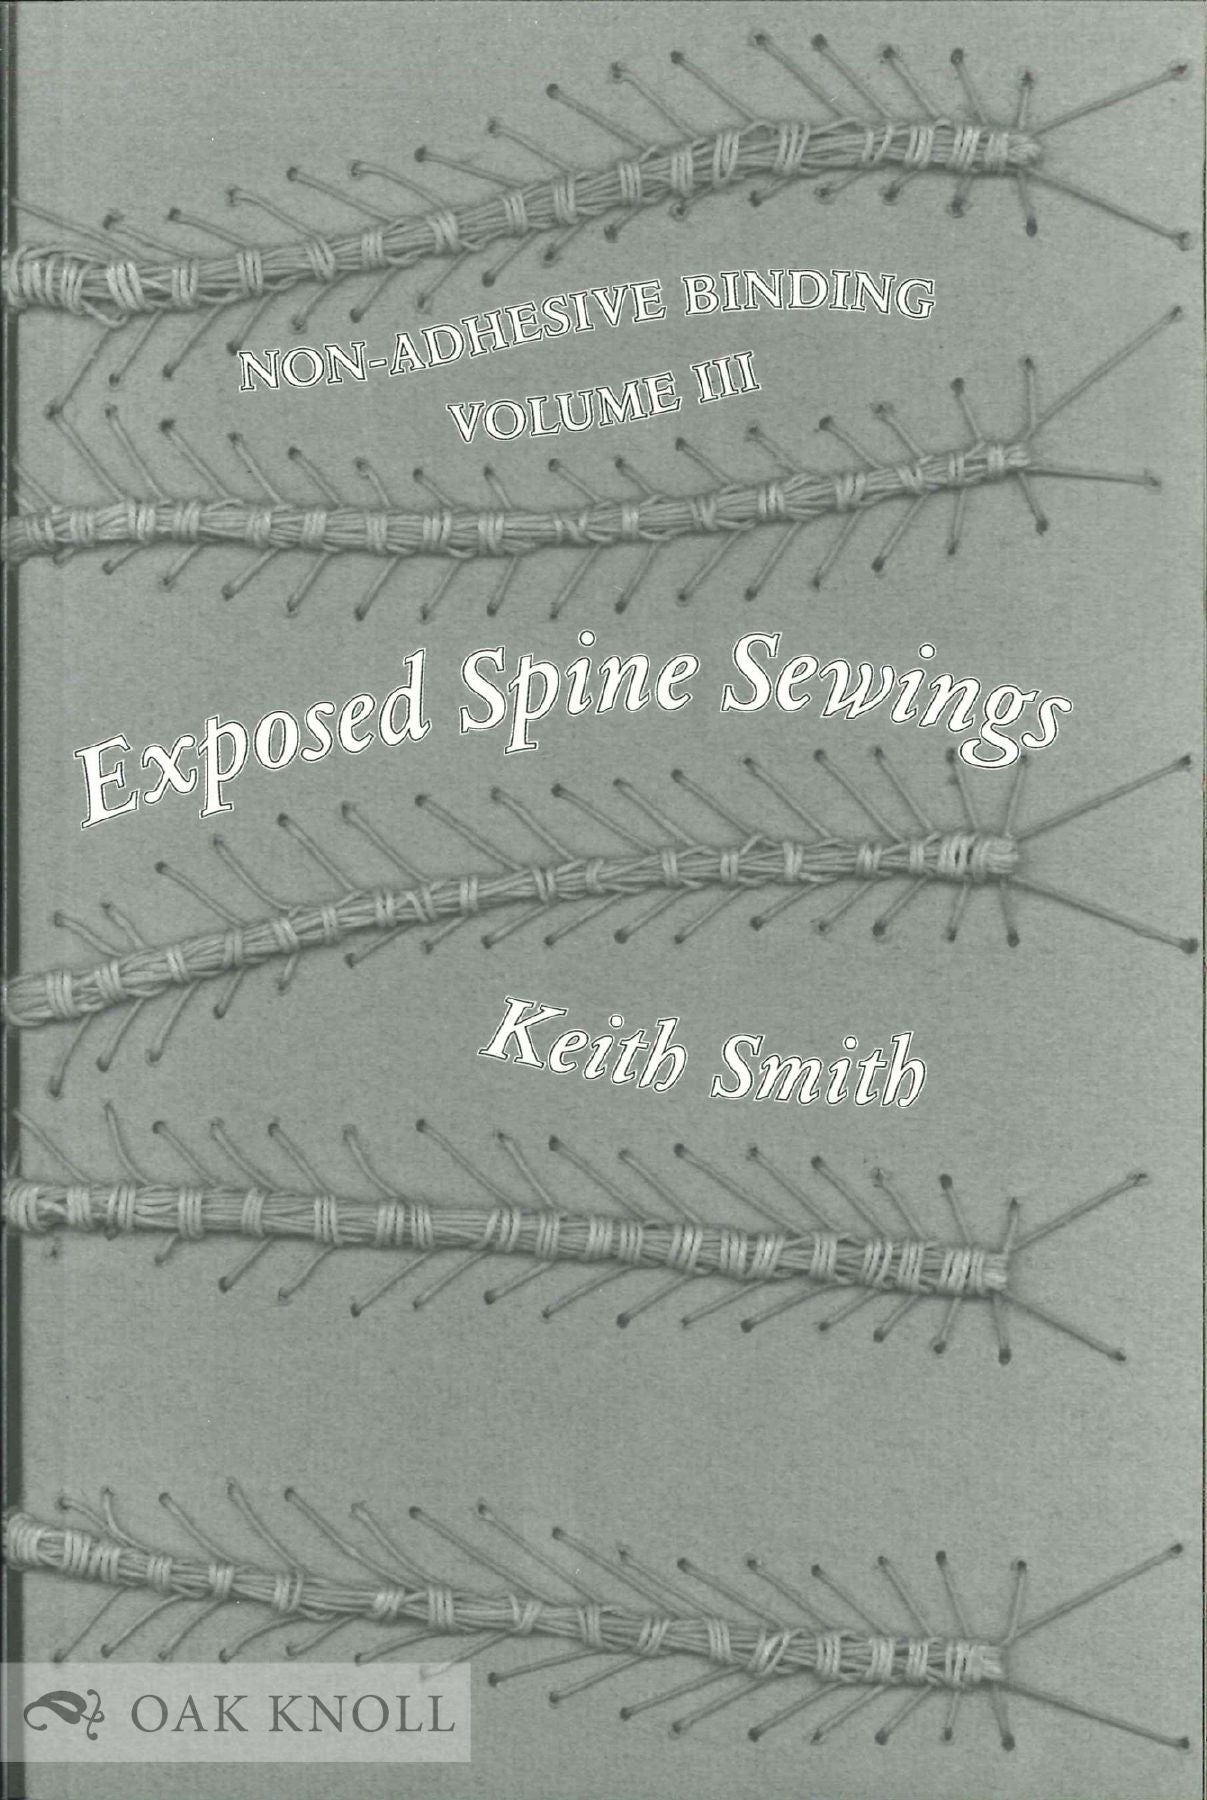 NON-ADHESIVE BINDING, BOOKS WITHOUT PASTE OR GLUE by Keith A. Smith on Oak  Knoll